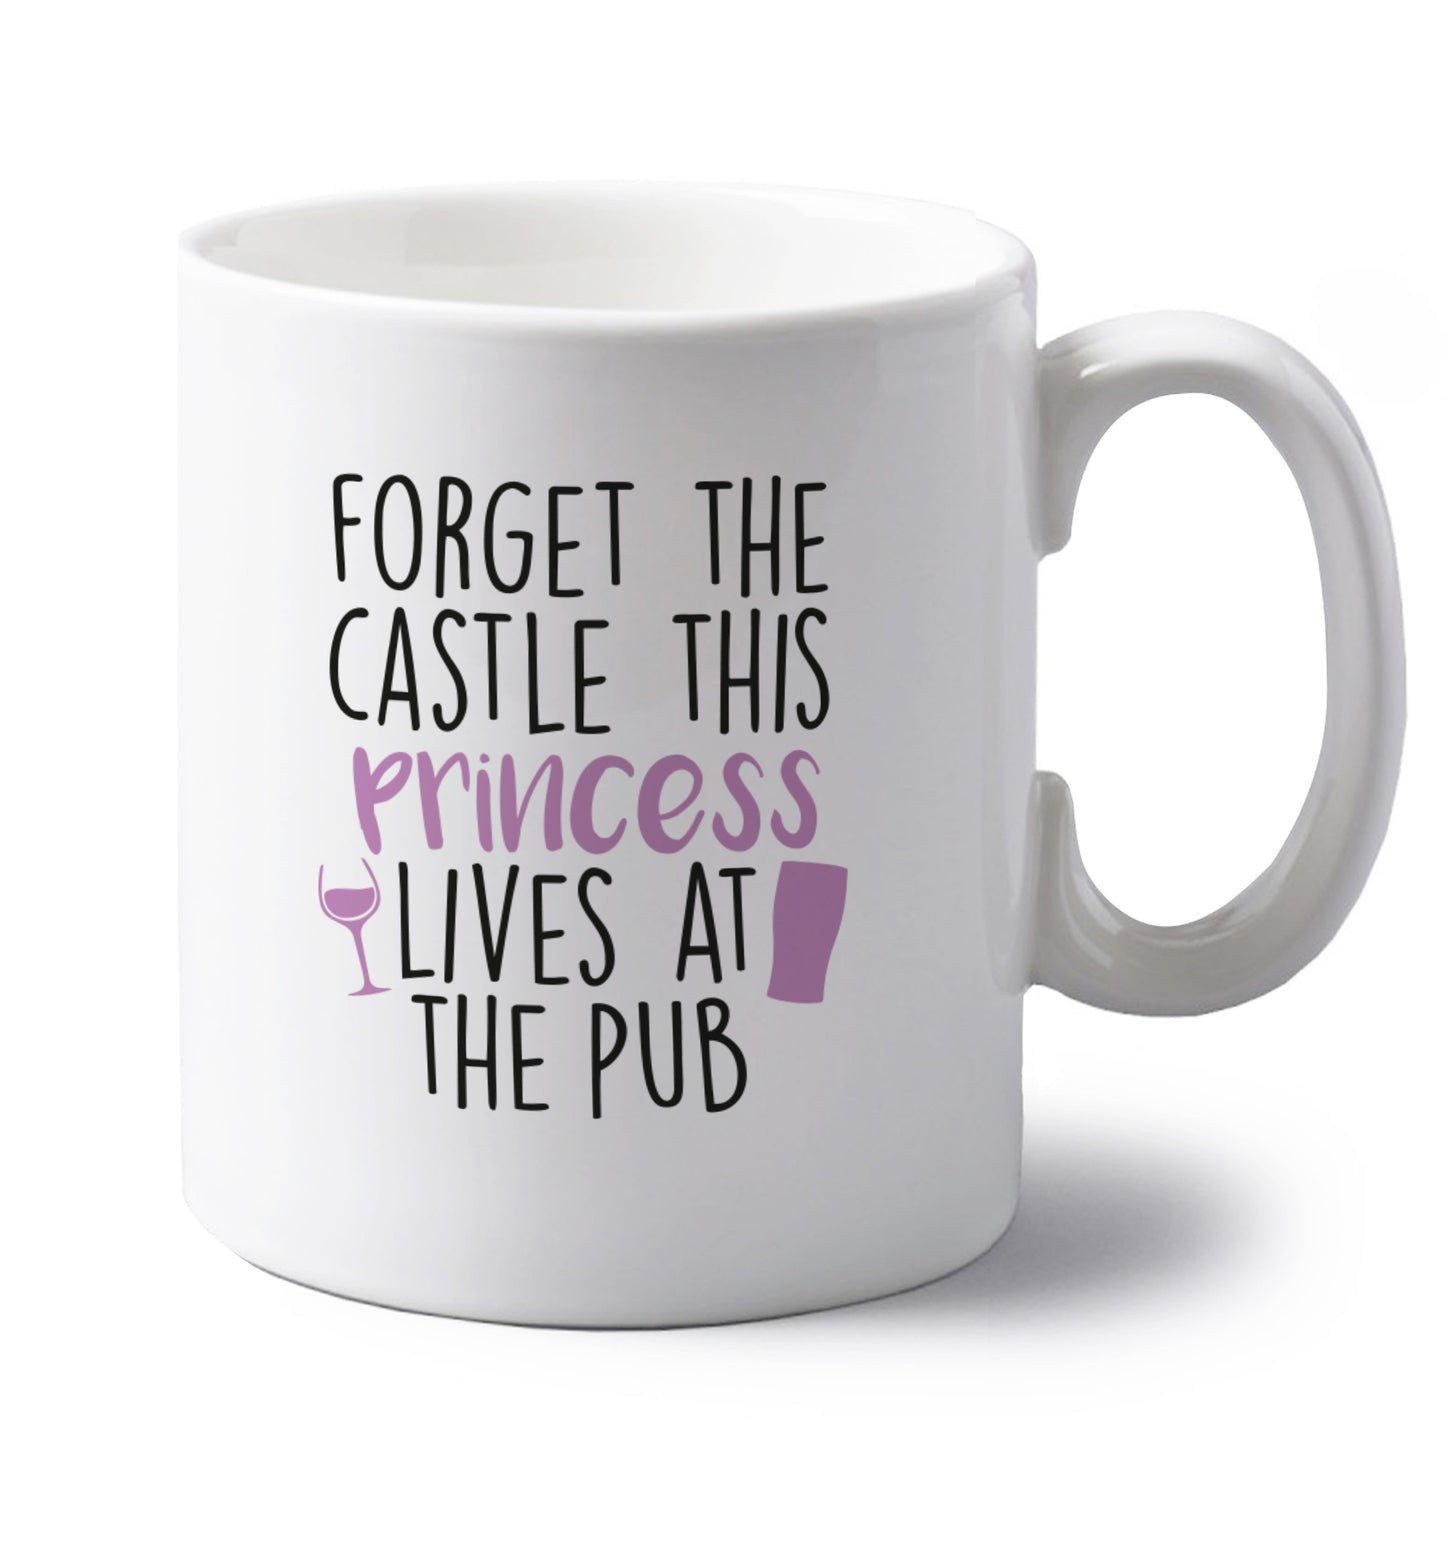 Forget the castle this princess lives at the pub left handed white ceramic mug 